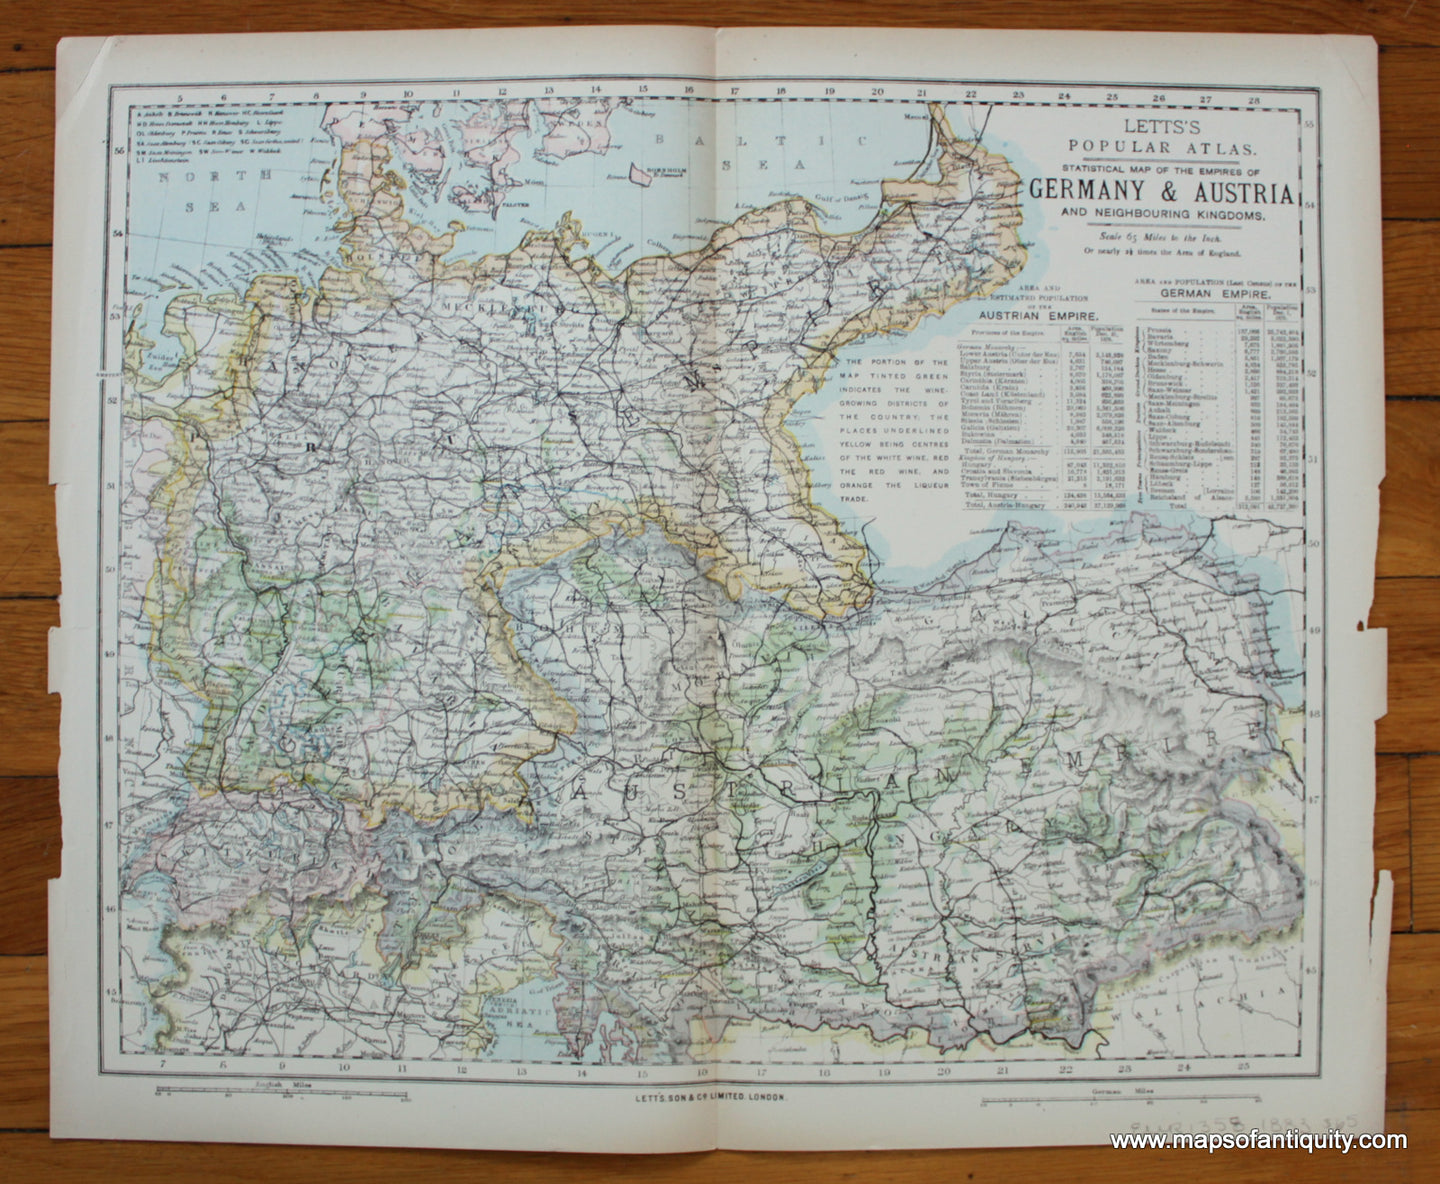 printed-color-Antique-Map-Statistical-Map-of-the-Empires-of-Germany-and-Austria-and-Neighboring-Kingdoms-********-Europe-Europe-General-1883-Letts-Maps-Of-Antiquity